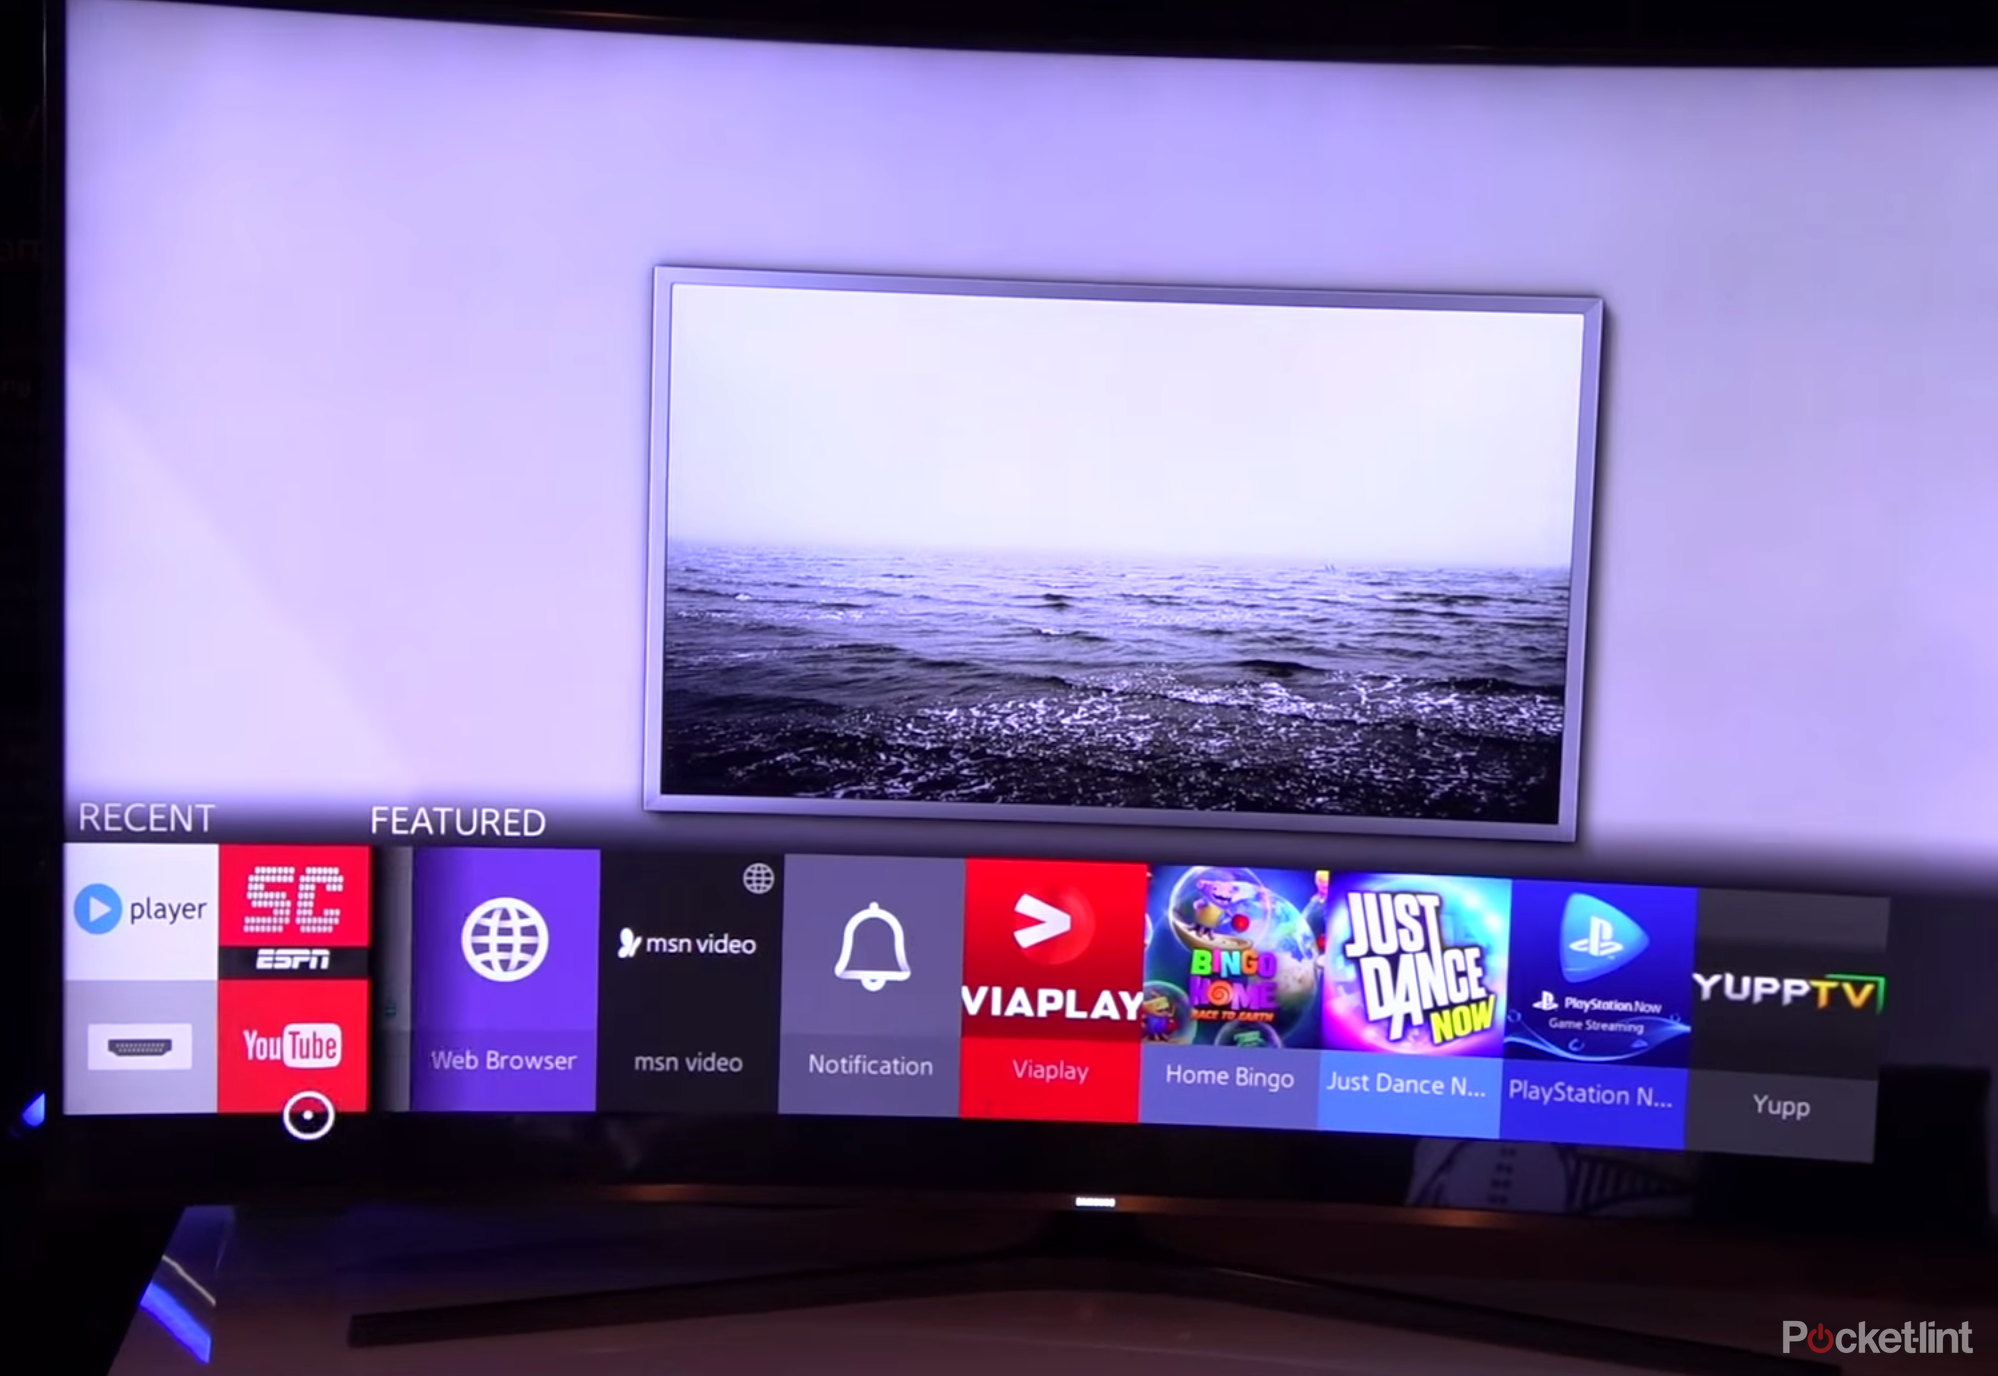 android tv vs samsung tizen vs firefox os vs lg webos what s the difference image 44